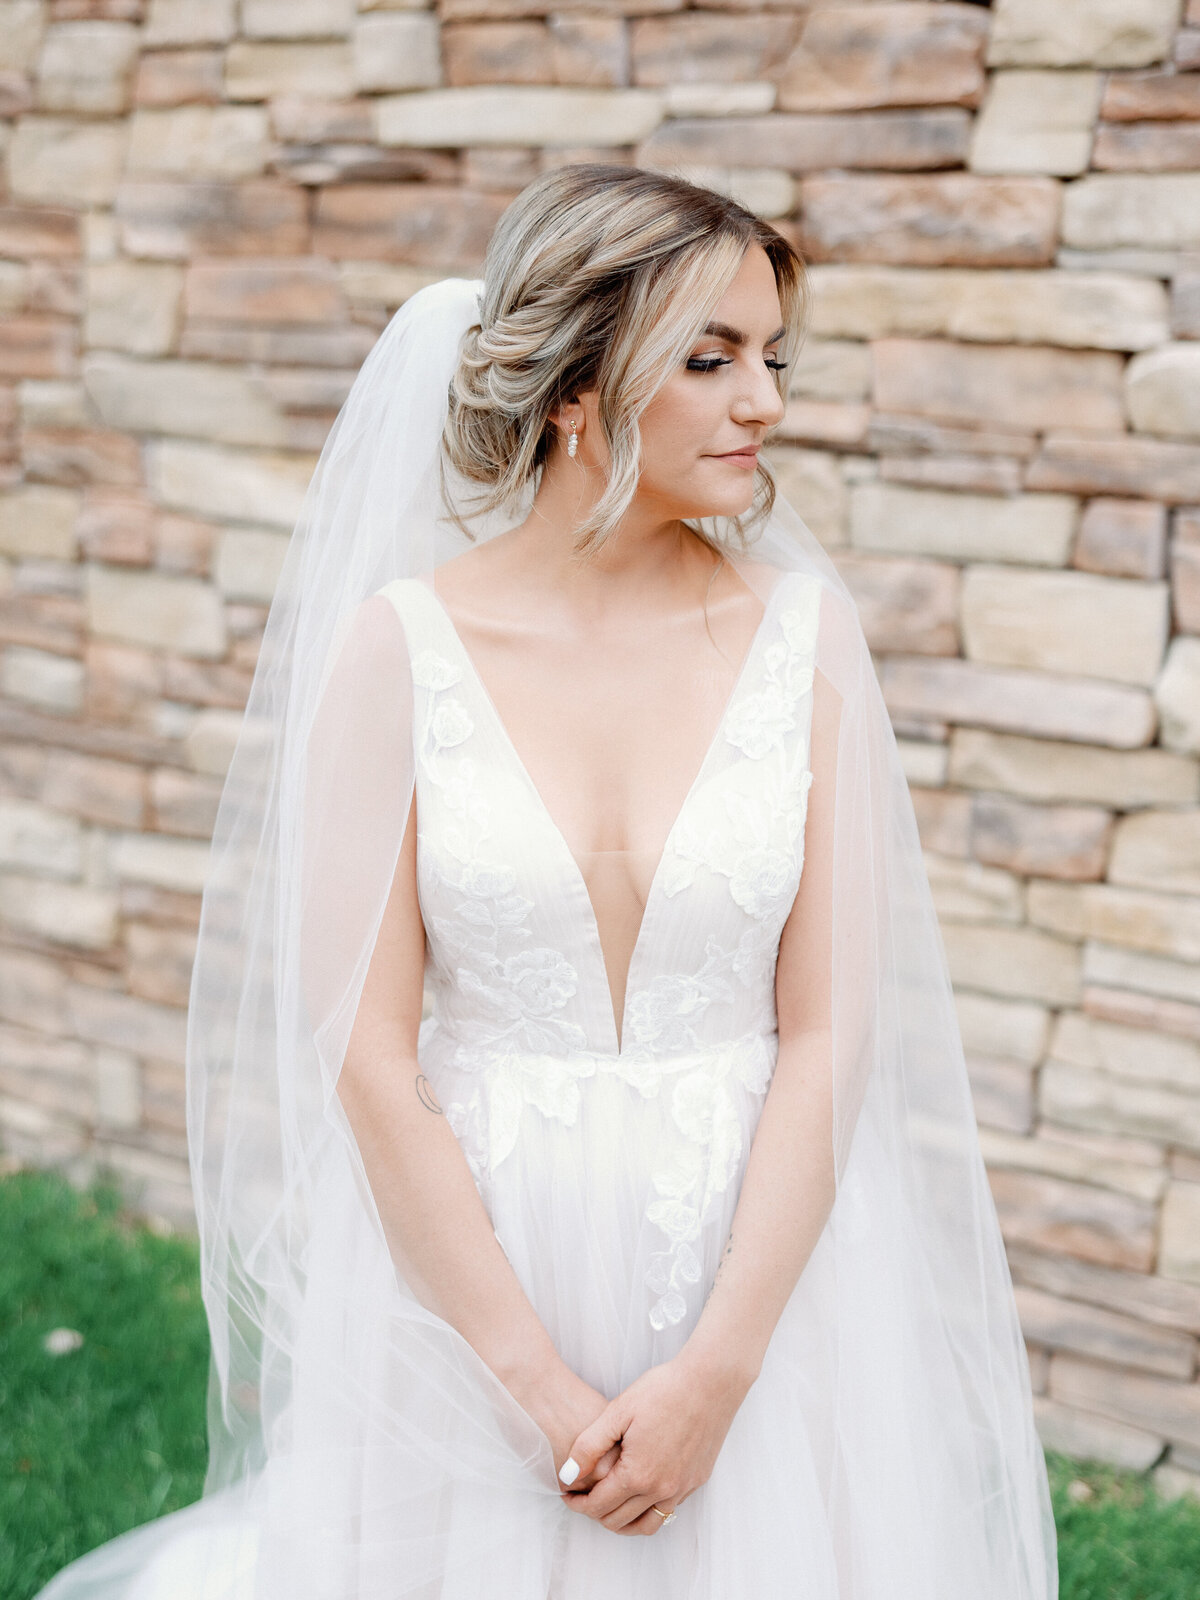 A bridal portrait of a bride wearing a lace deep v-neck wedding dress and tool veil as she looks over her shoulder and holds her hands in front of her body